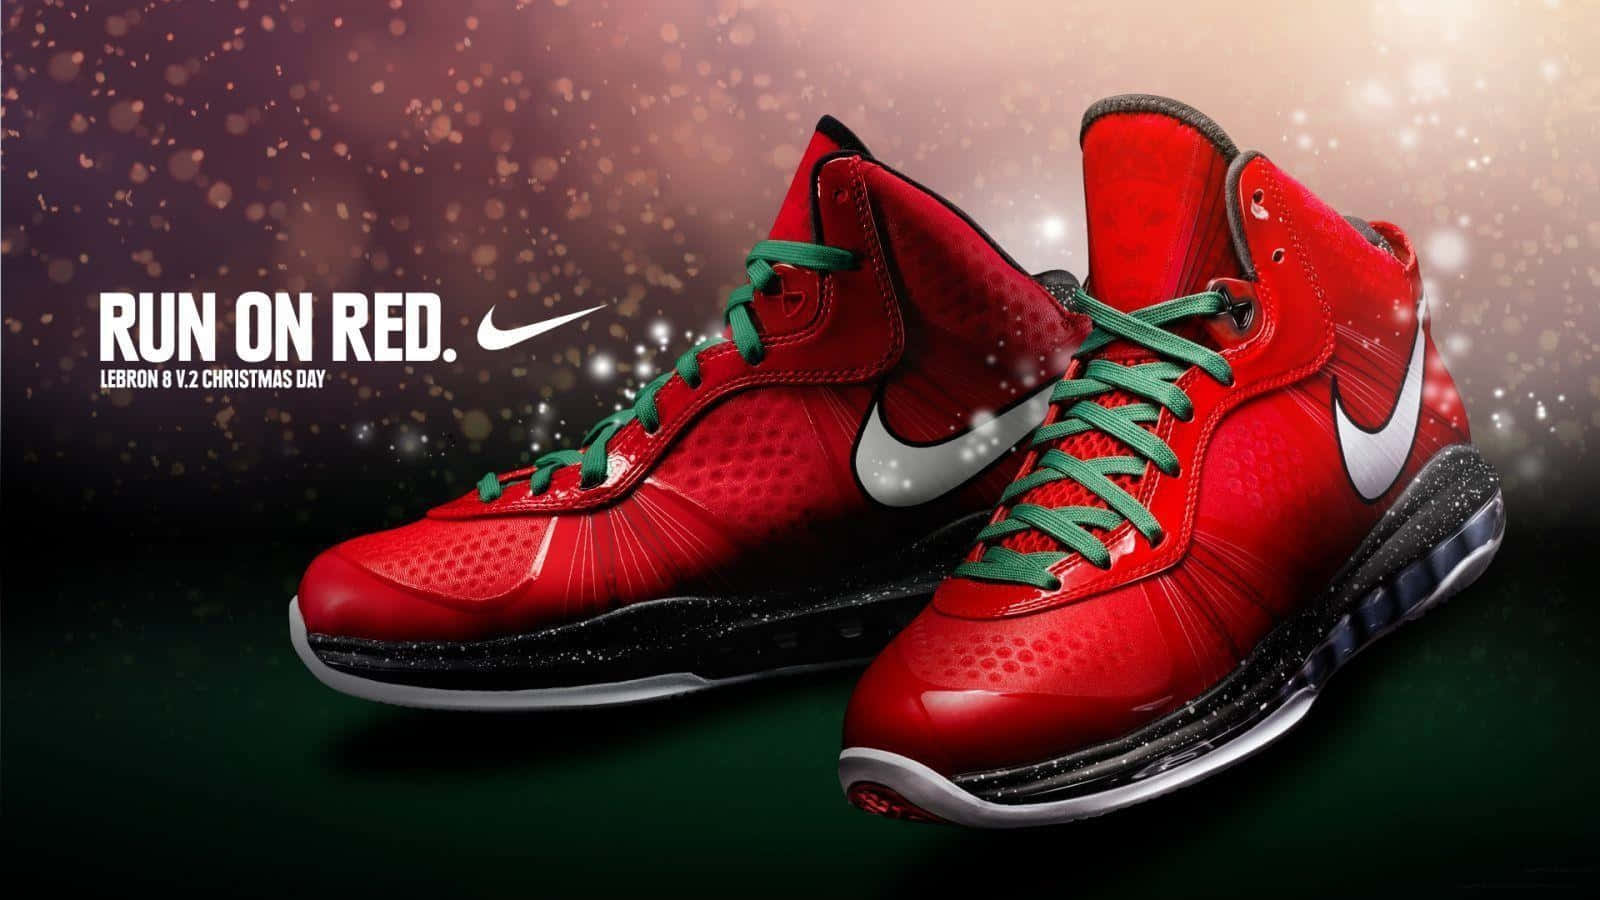 "Unleash your style with the vibrant red Nike." Wallpaper